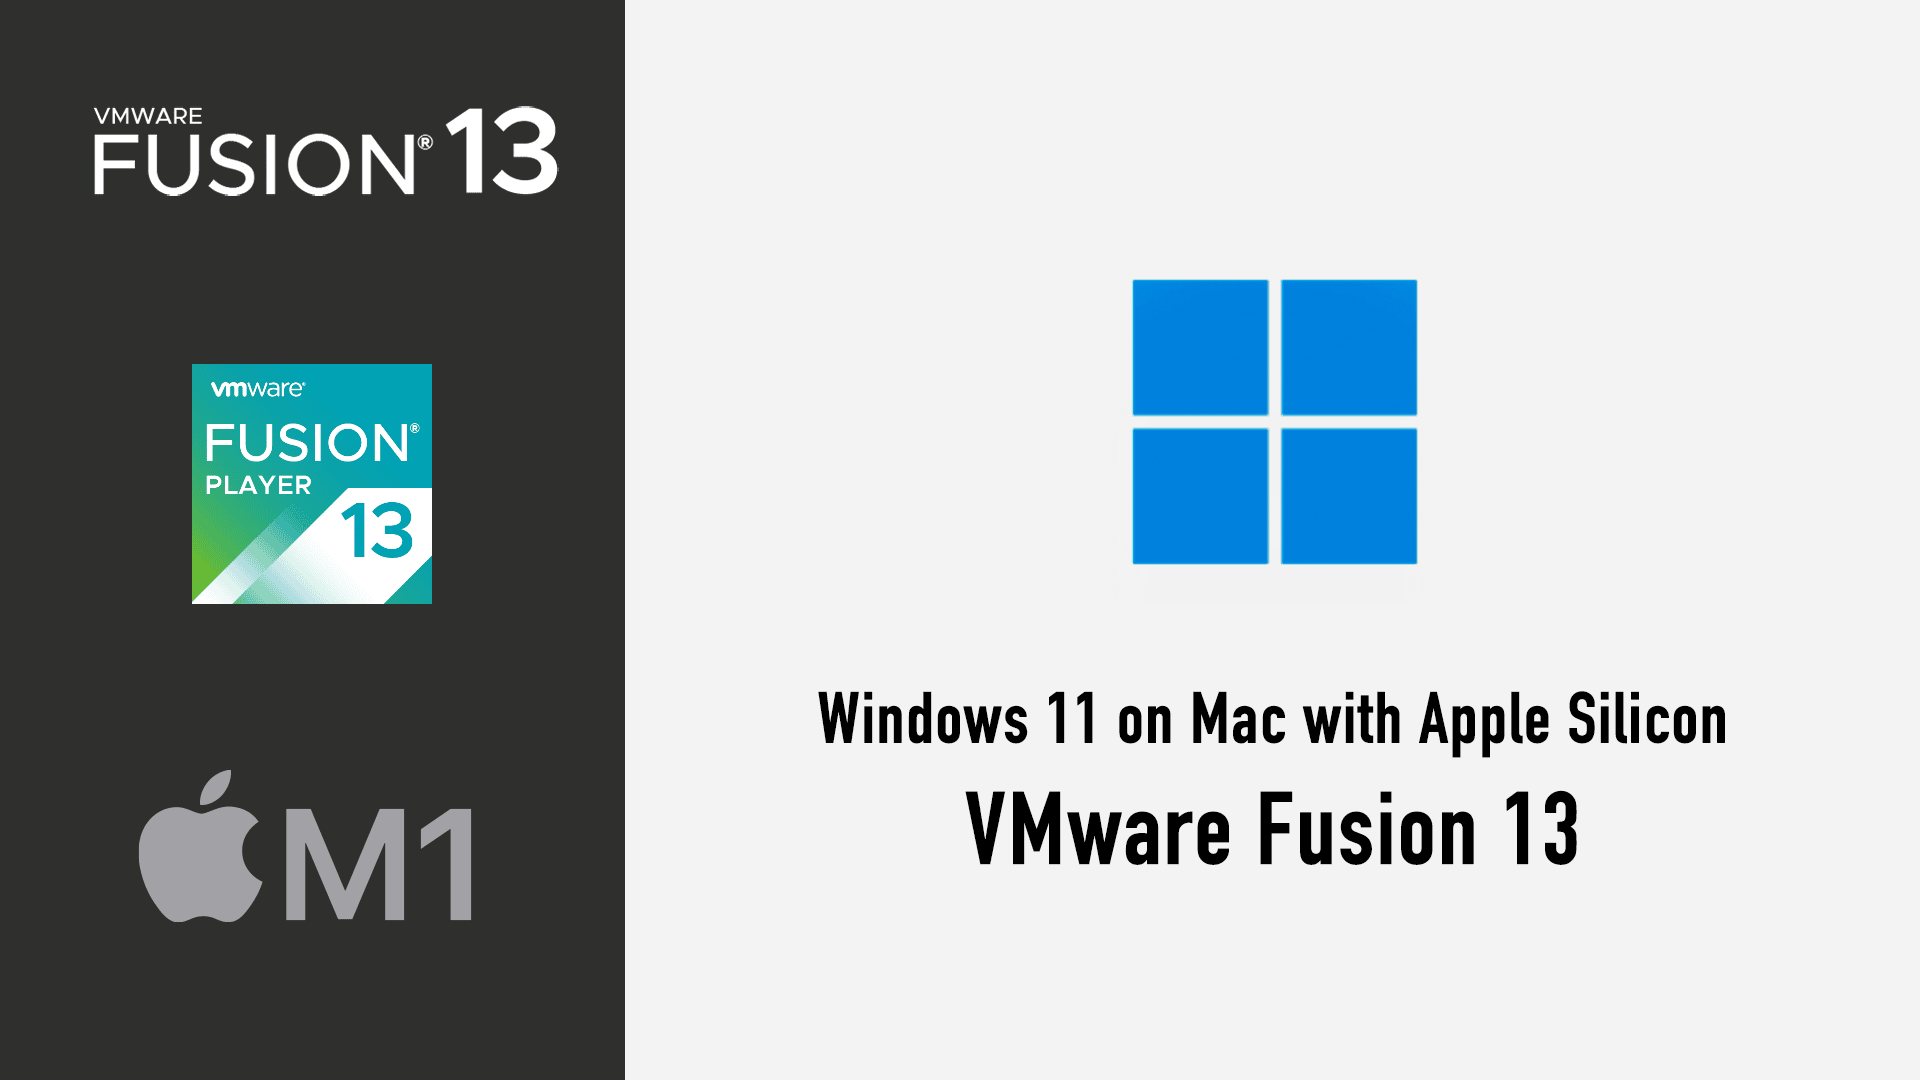 Another (free) approach to Windows 11 on Mac with Apple Silicon - VMware Fusion 13